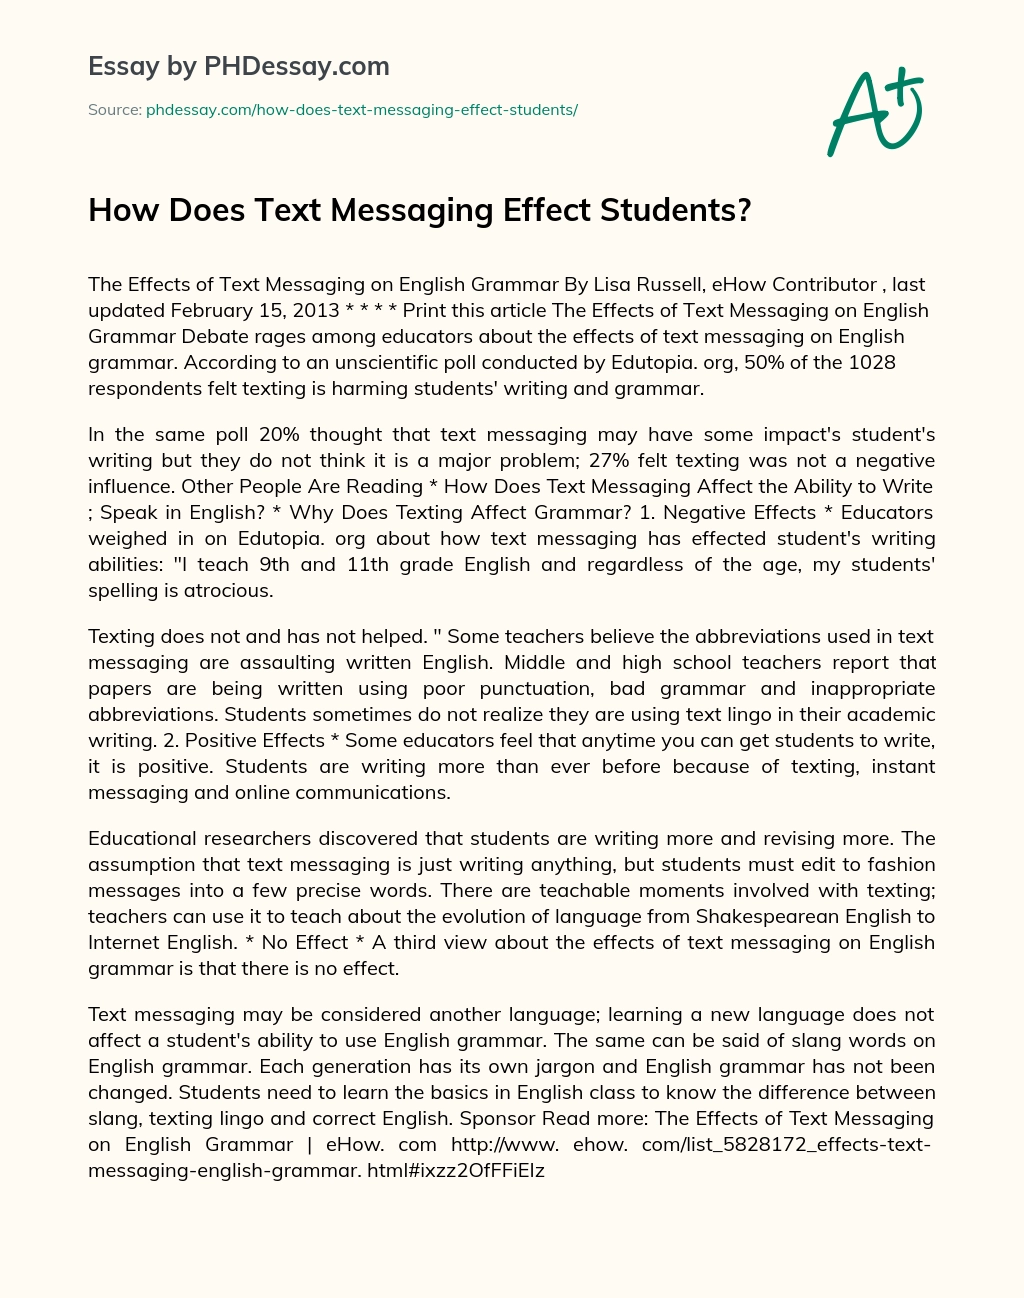 How Does Text Messaging Effect Students? essay